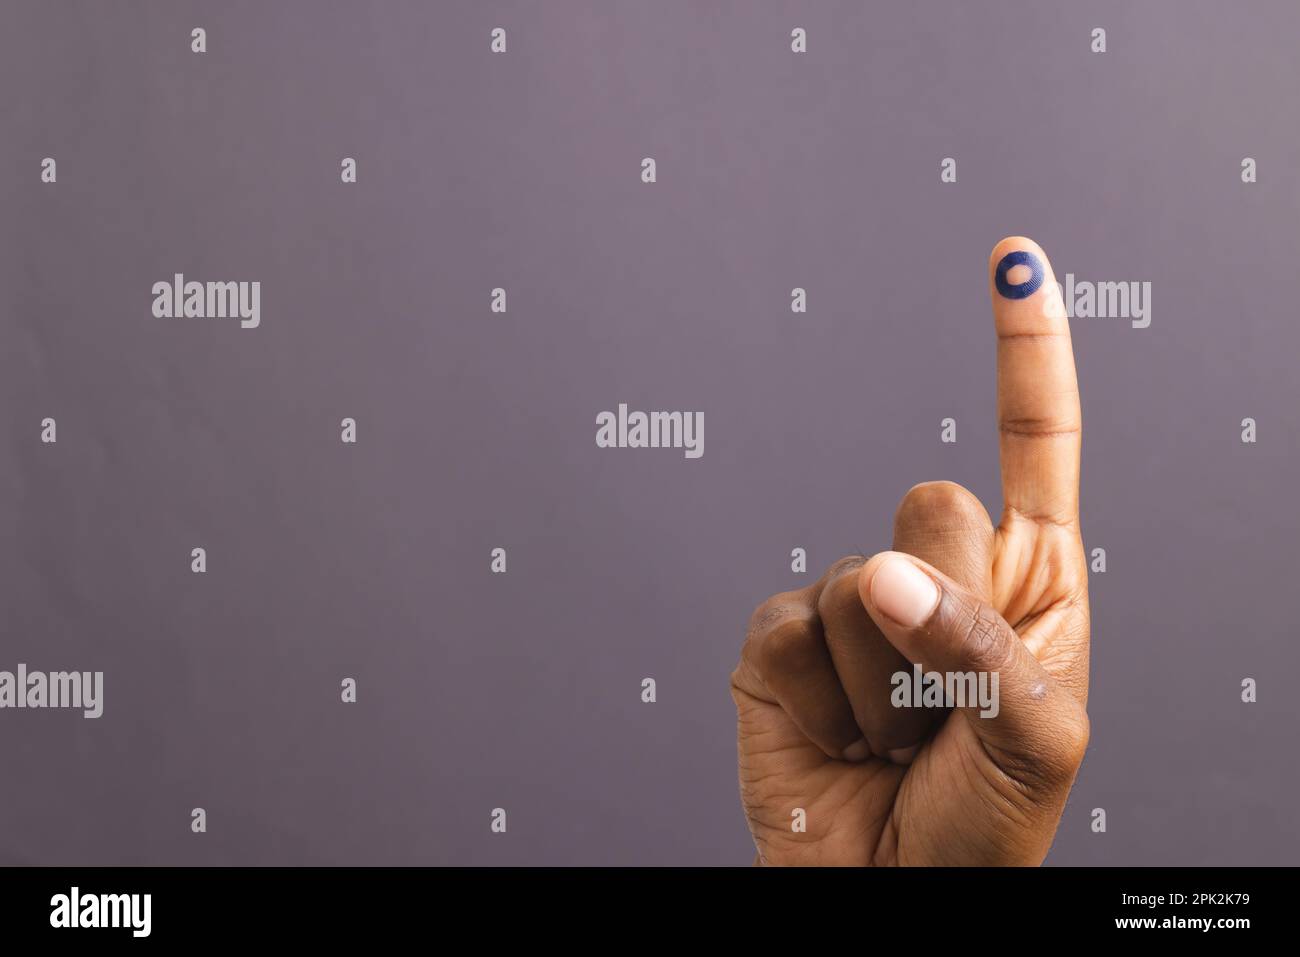 Hand of biracial man with blue ring on outstretched finger, on grey background with copy space Stock Photo